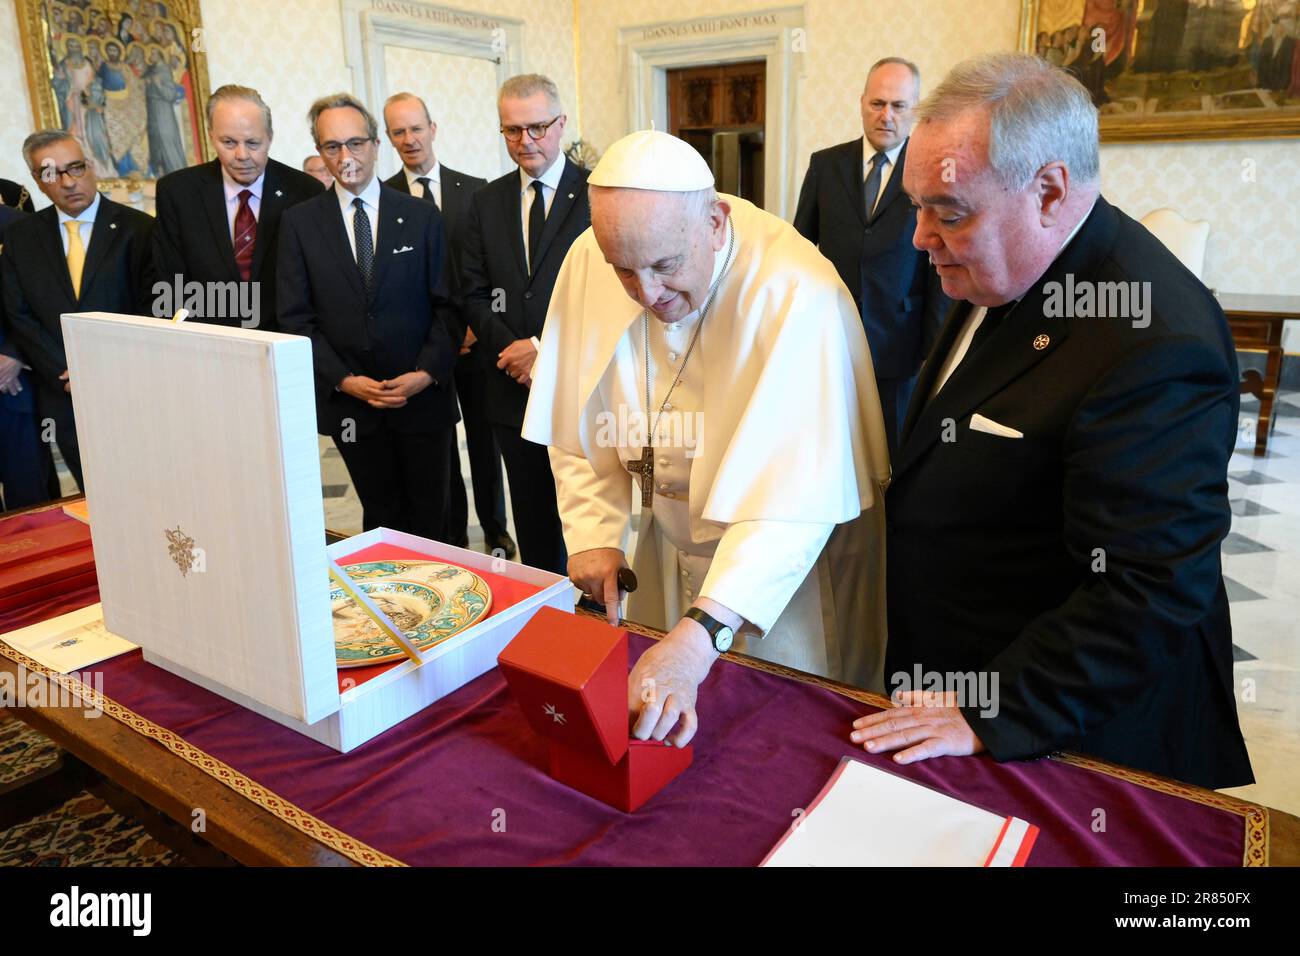 Italy, Rome, Vatican, 19-06-2023 His Most Eminent Highness Fra' John T. Dunlap, Prince and Grand Master of the Sovereign Military Order of Malta 19-06-2023 Sua Altezza Eminentissima Fra' John T. Dunlap, Principe e Gran Maestro del Sovrano Militare Ordine di Malta Photograph by Vatican Media /Catholic Press Photo/IPA RESTRICTED TO EDITORIAL USE - NO MARKETING - NO ADVERTISING CAMPAIGNS Stock Photo